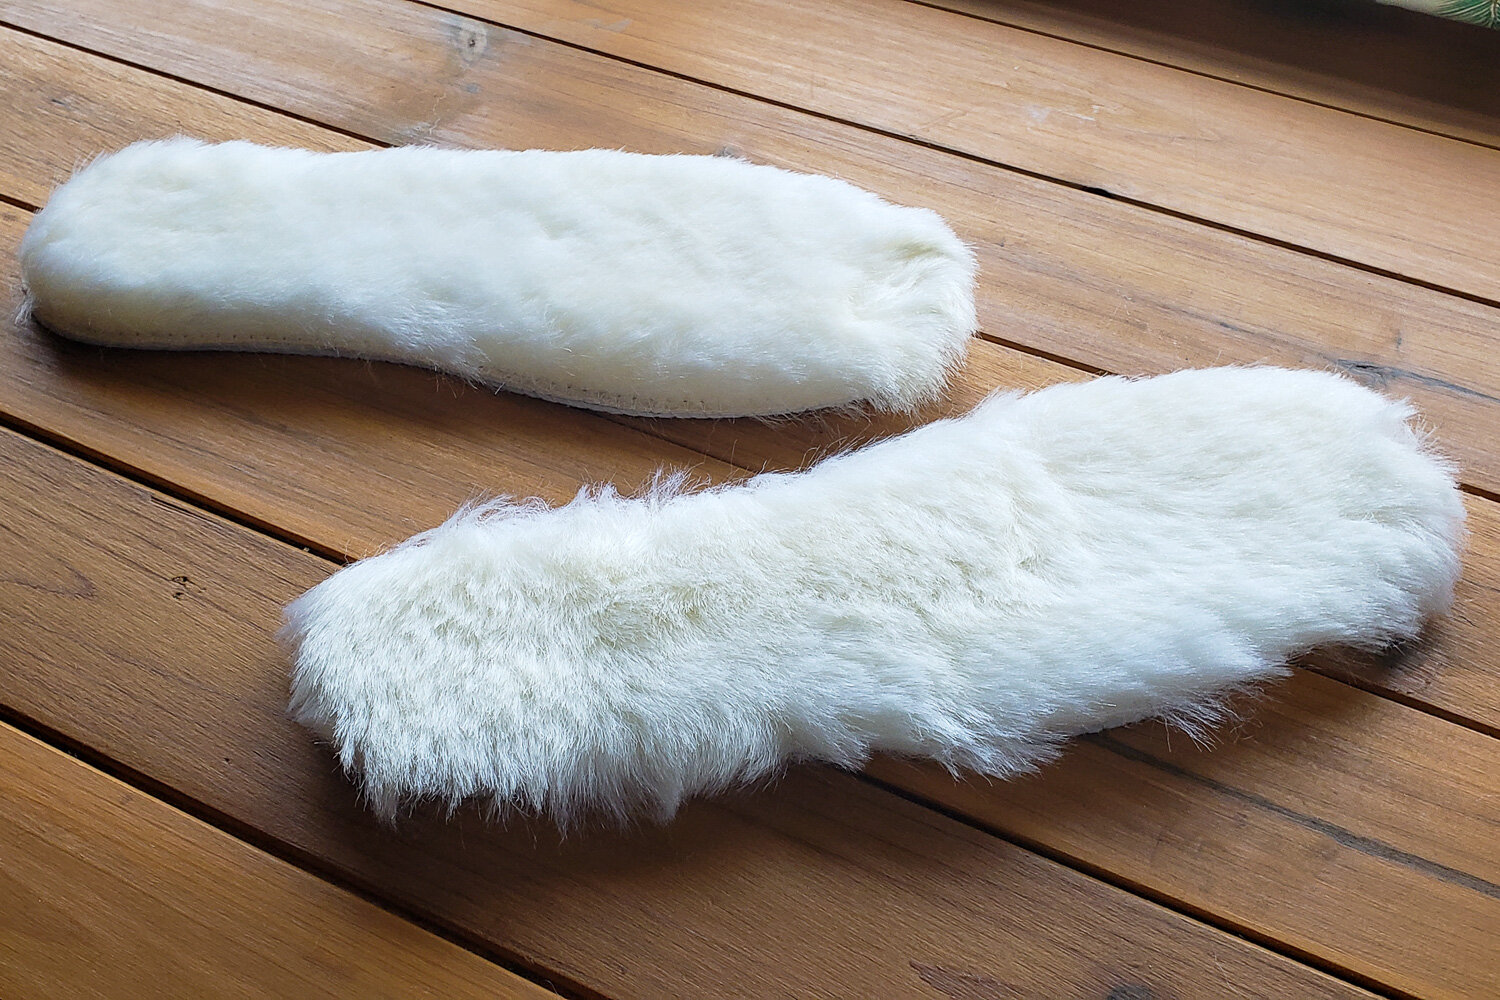 Bacophy Sheepskin Fleece Insoles add warmth and cushion to any boots or shoes